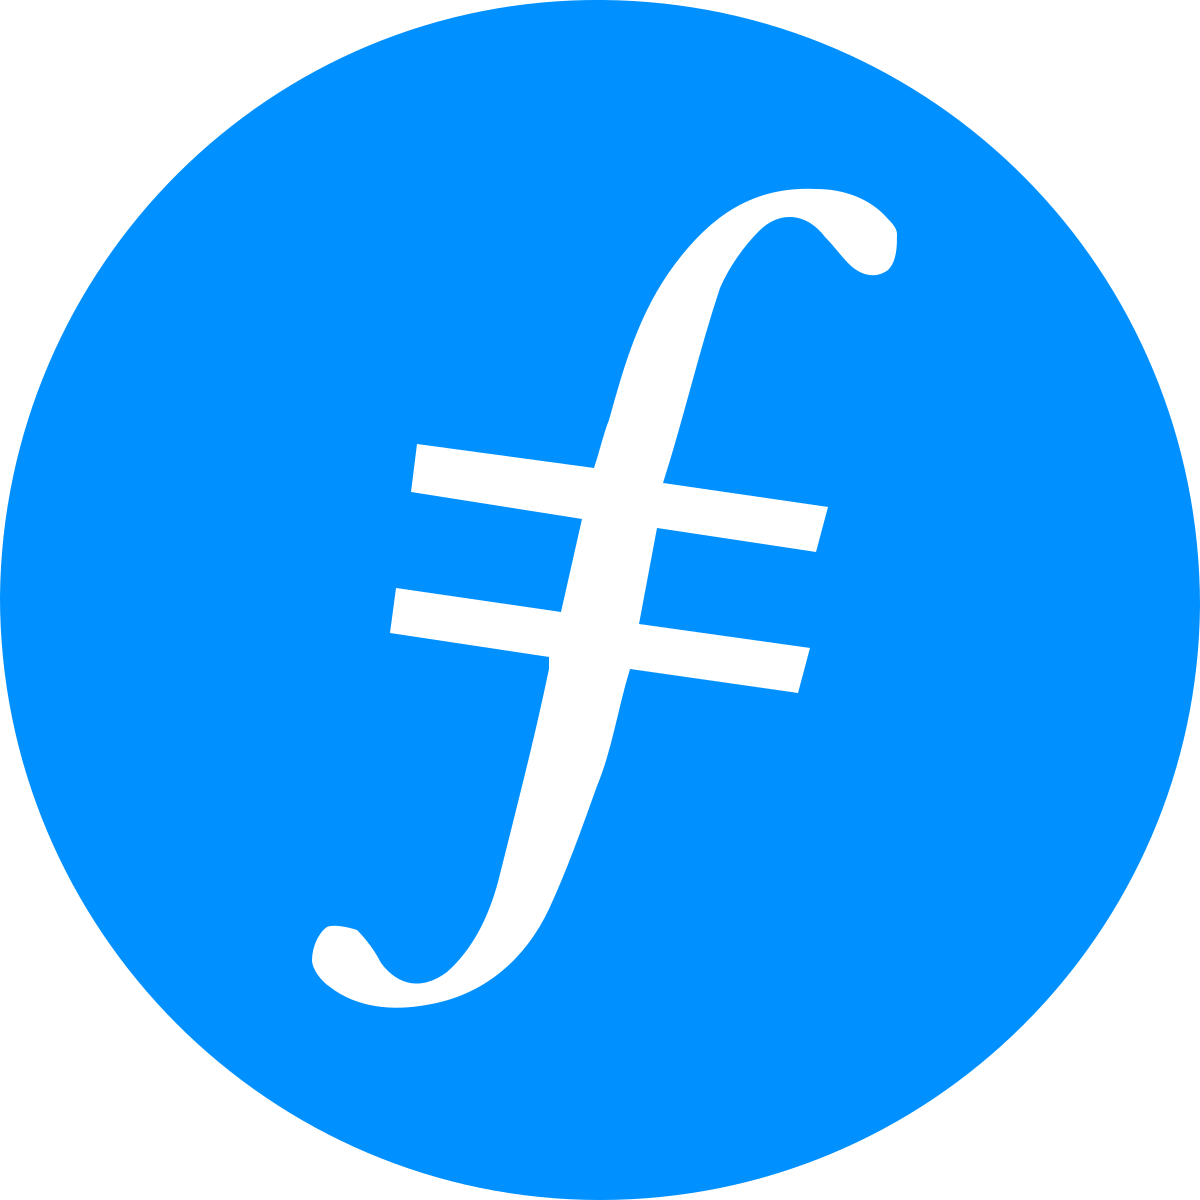 Filecoin Price Today - FIL to US dollar Live - Crypto | Coinranking